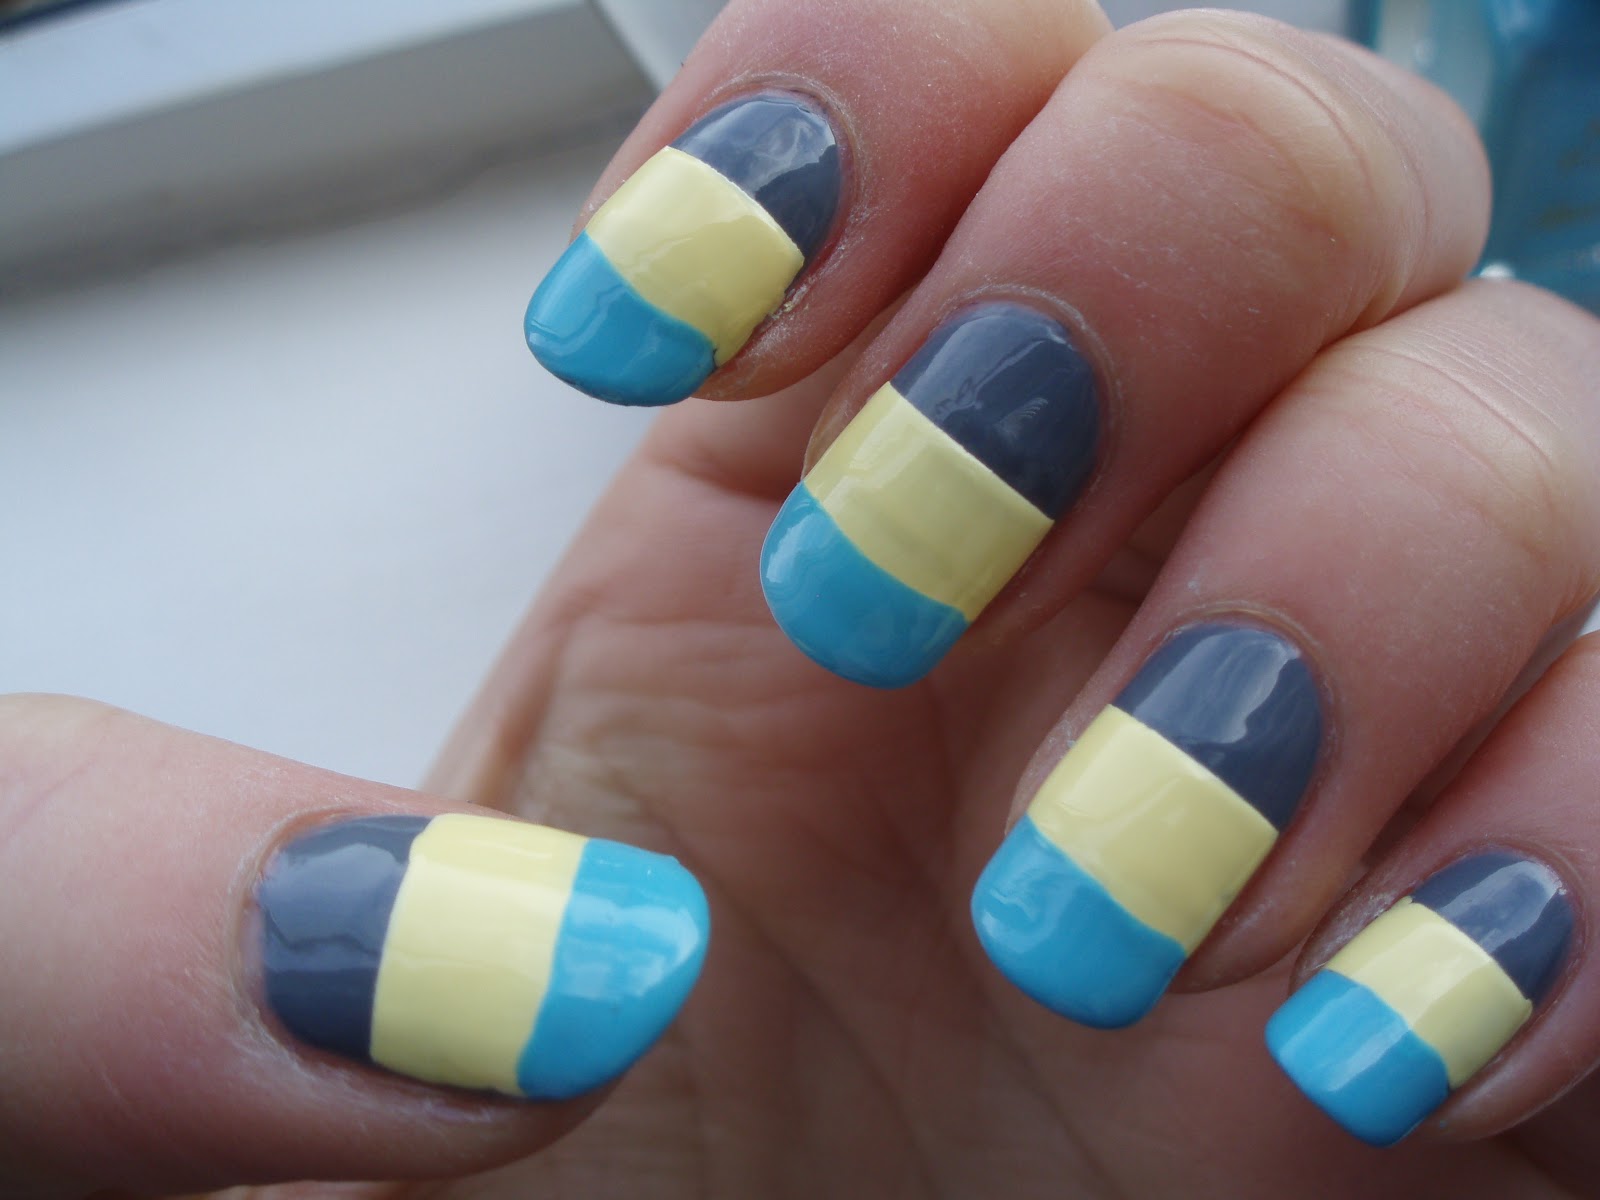 2. "Step-by-Step Color Block Nail Tutorial" - wide 4